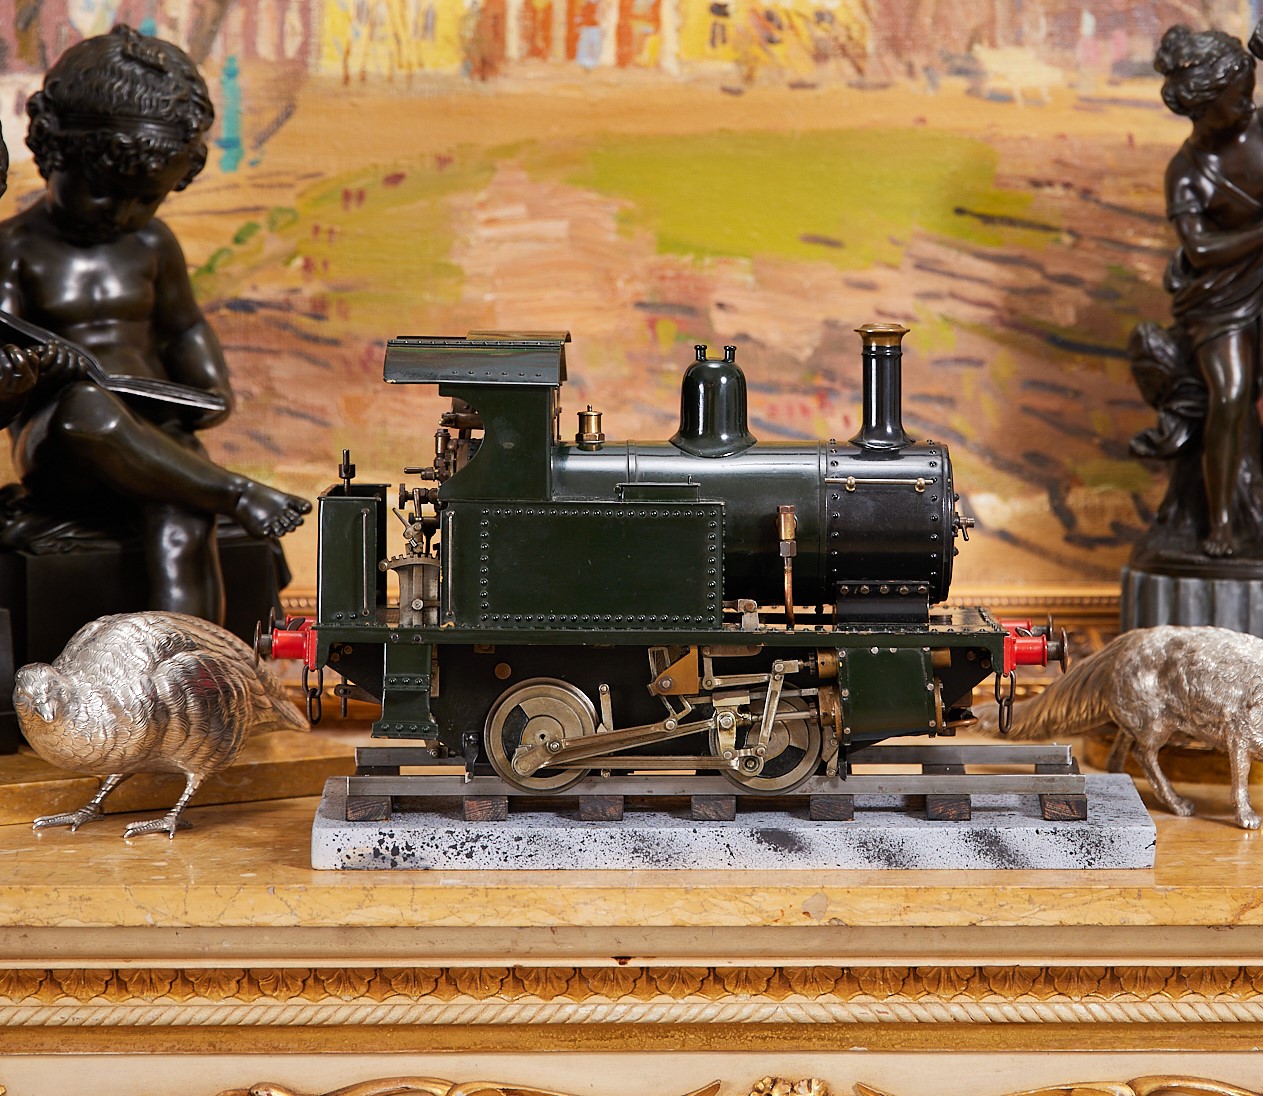 A FULL WORKING MODEL OF A STEAM TRAIN - Image 2 of 22